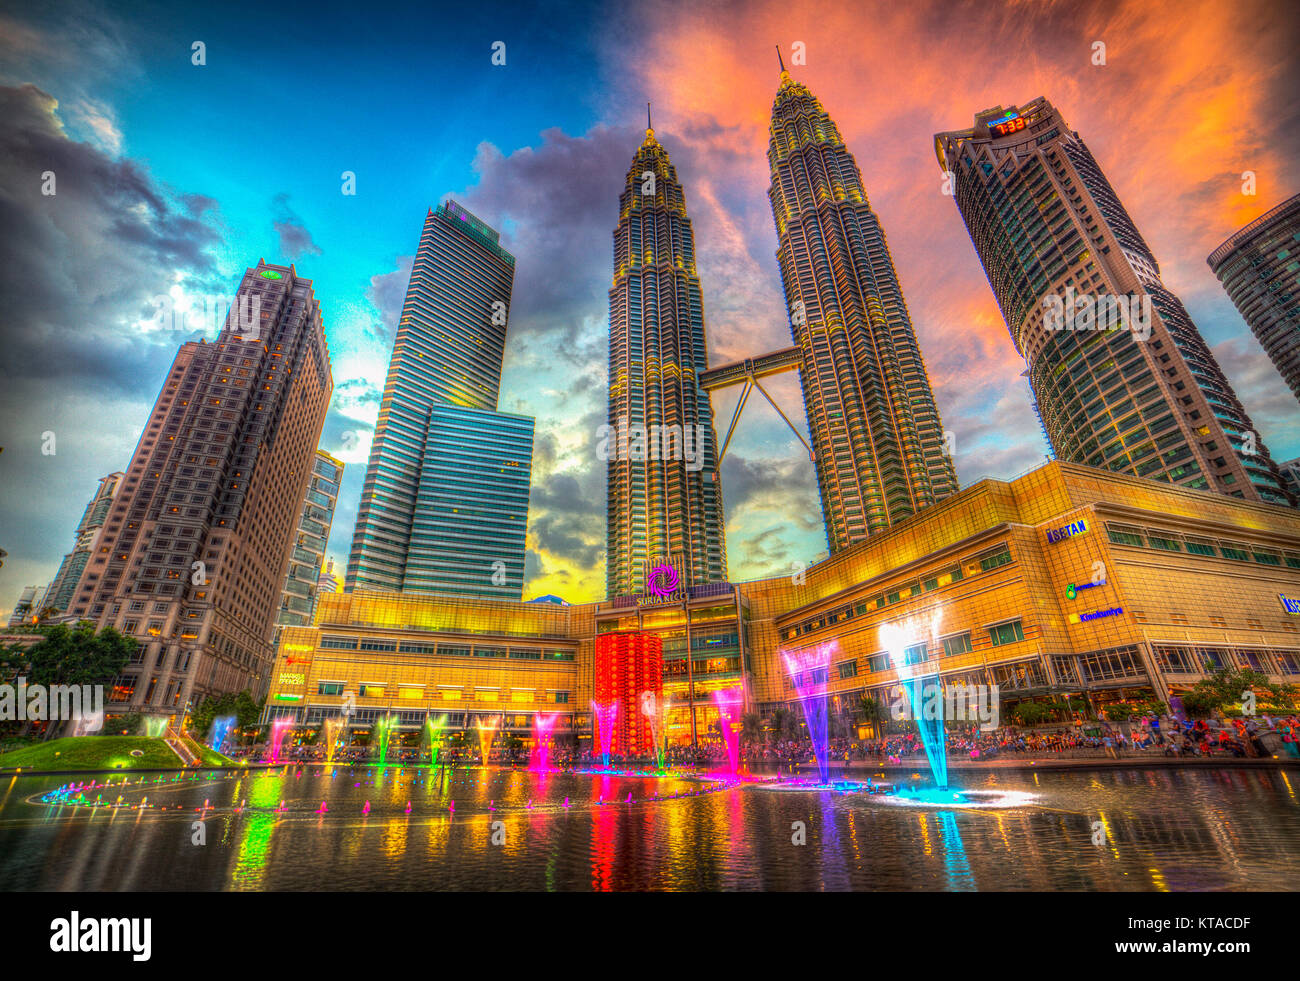 Colourful light and water shows entertain shoppers and visitors nightly by the pool at the Suria KLCC shopping mall, Kuala Lumpur, Malaysia. Stock Photo